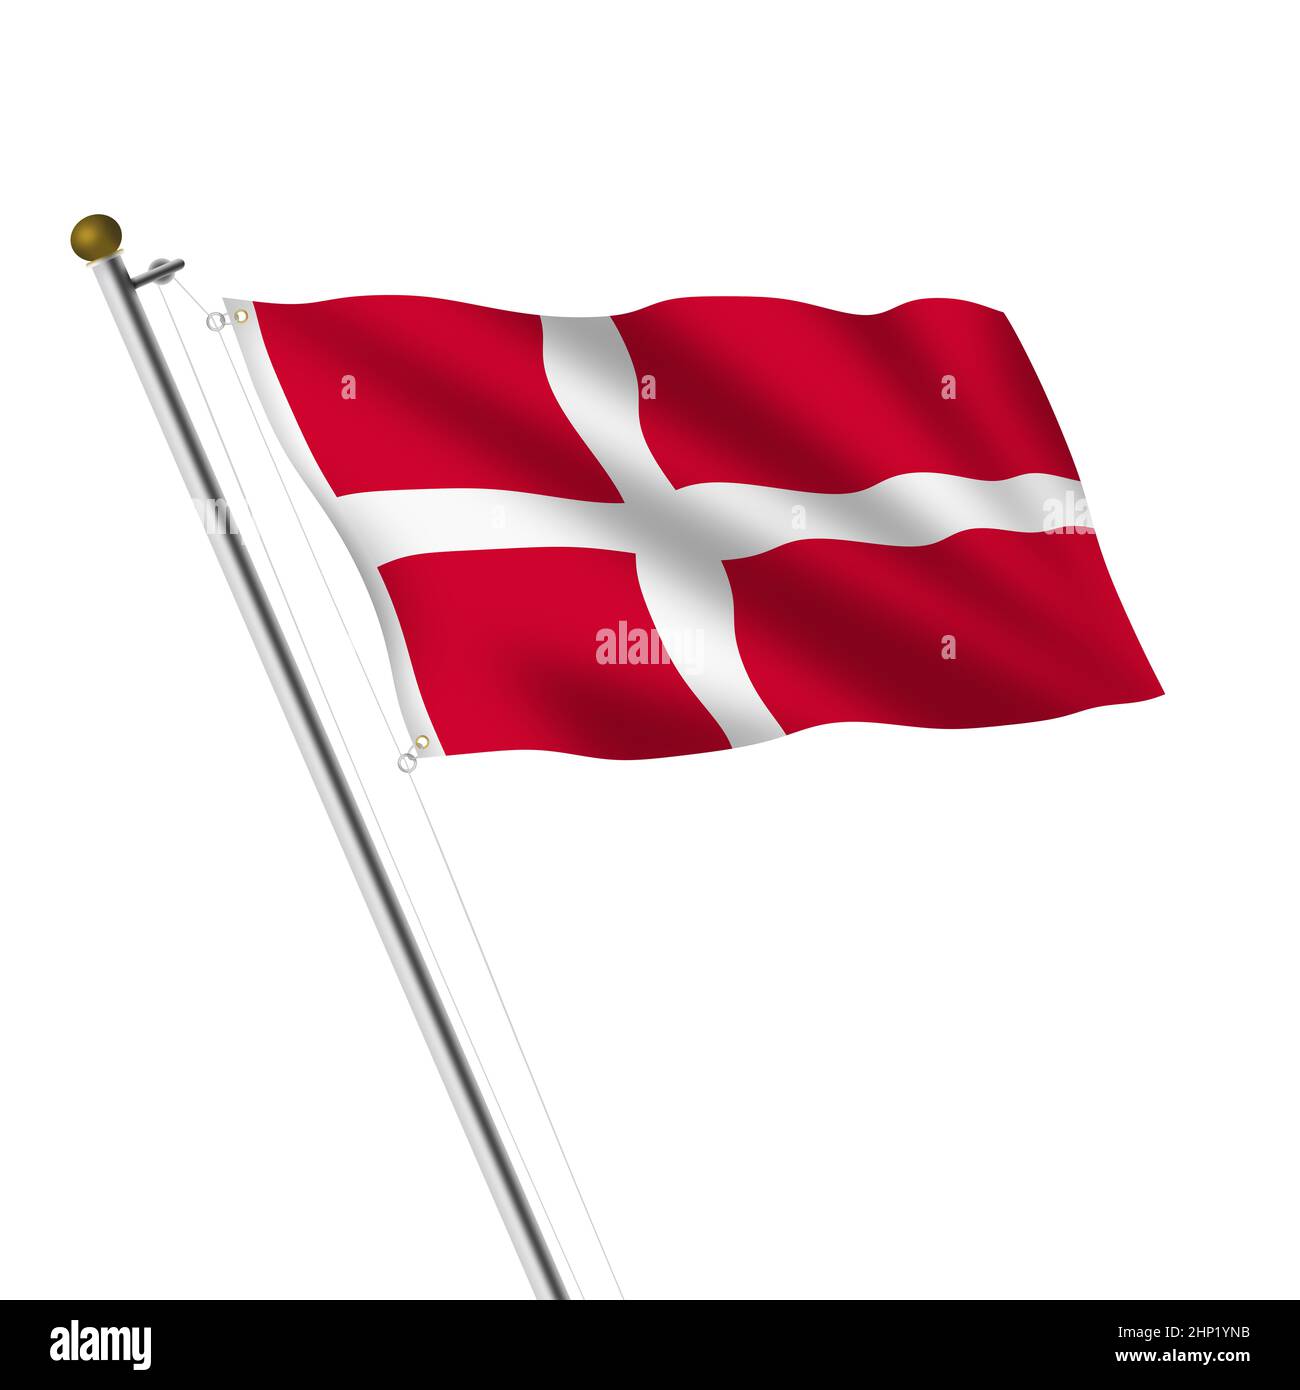 A Denmark Flagpole 3d illustration on white with clipping path Stock Photo